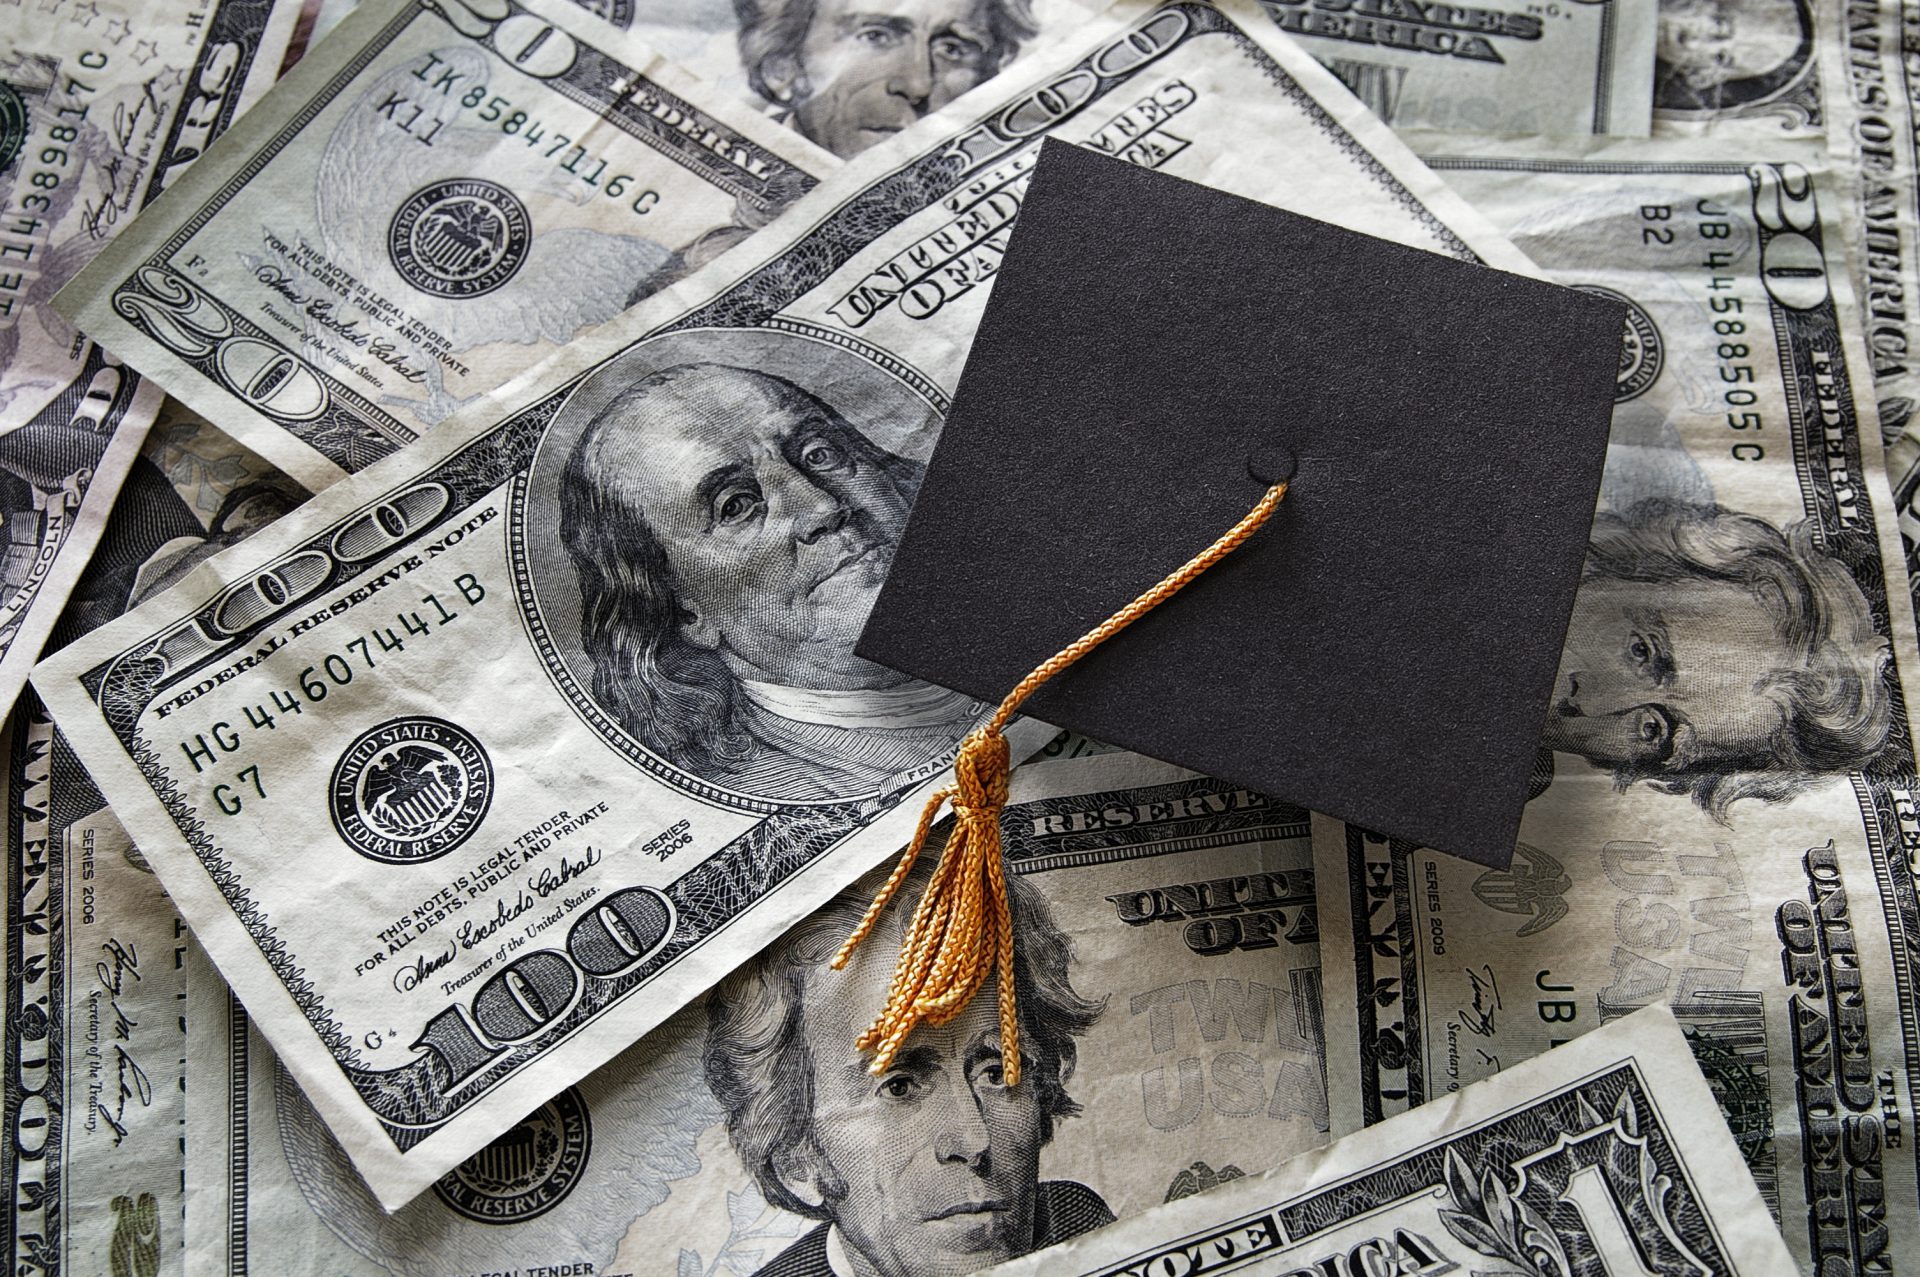 Commentary: Public should pay for student loans, biased education